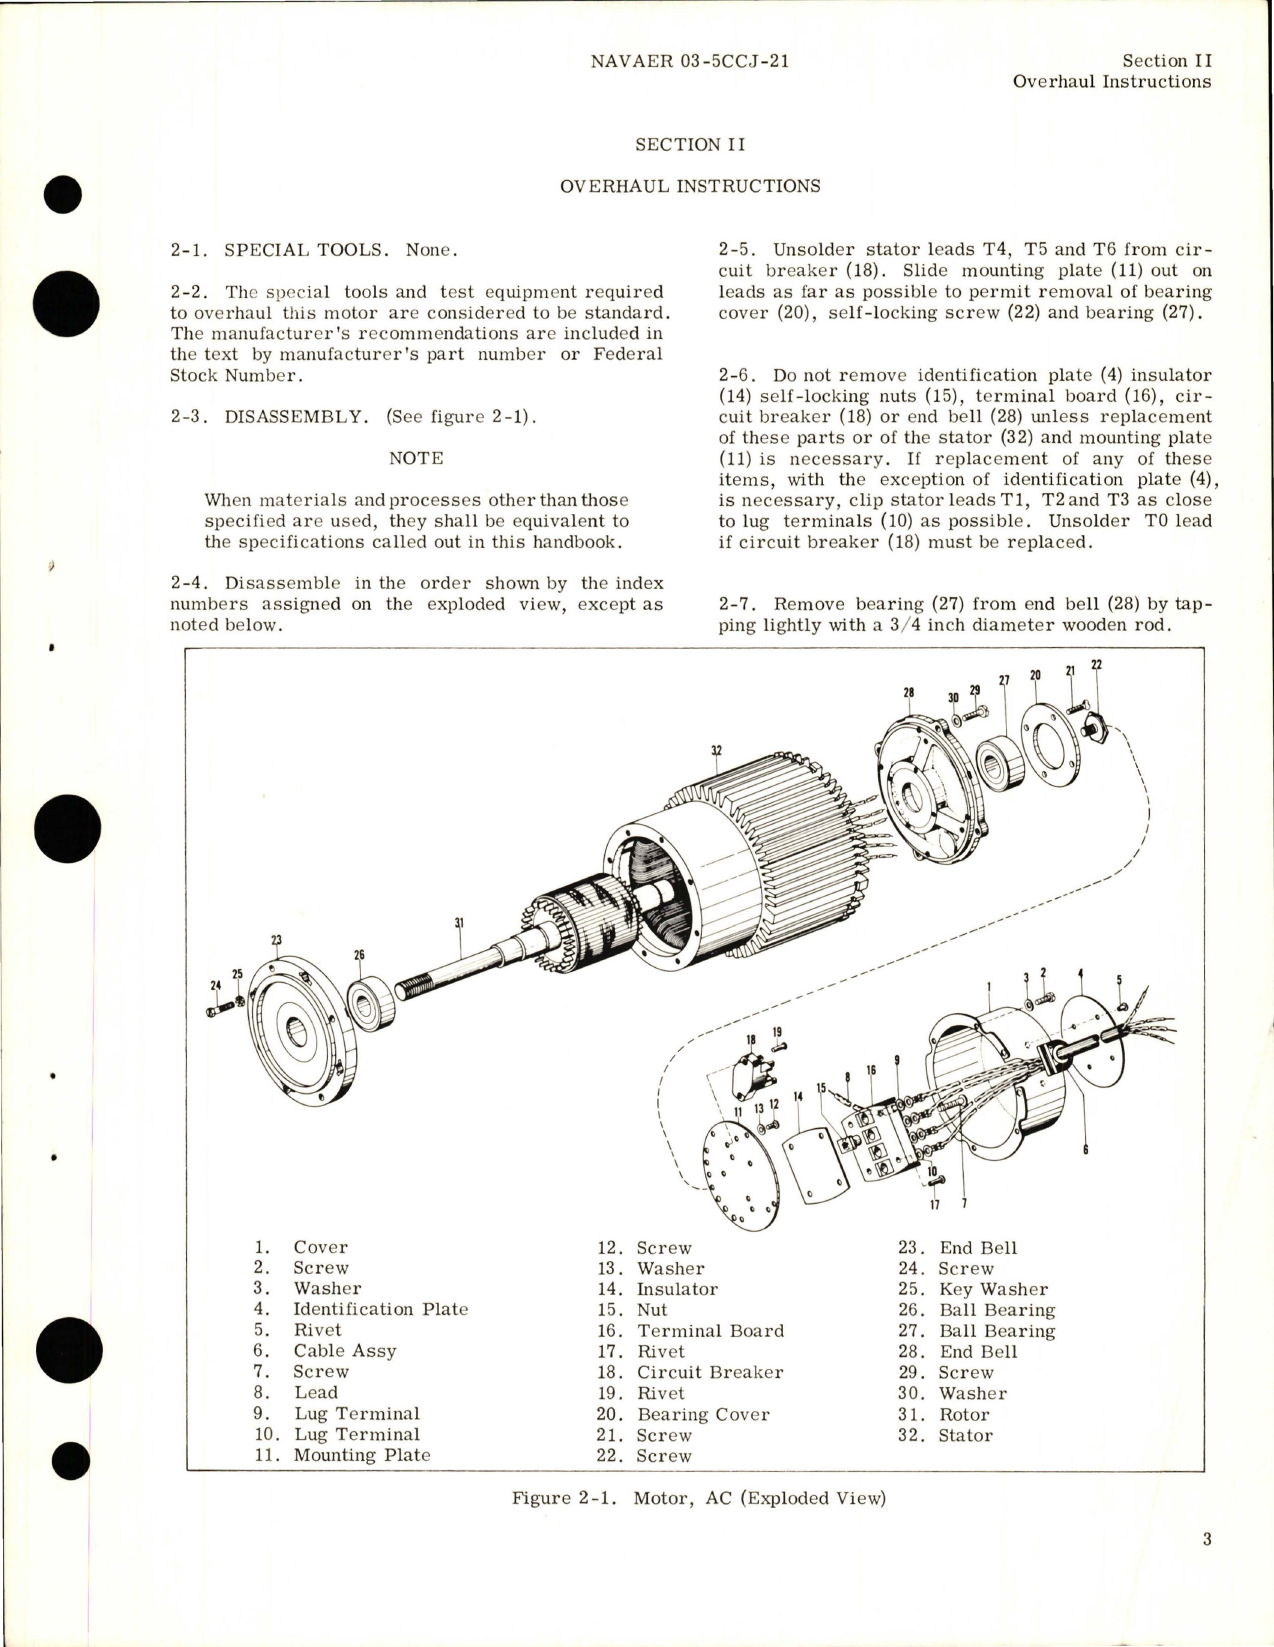 Sample page 7 from AirCorps Library document: Overhaul Instructions for AC Motor - Parts 906D085-1, 906D086-1, and 906D087-1 